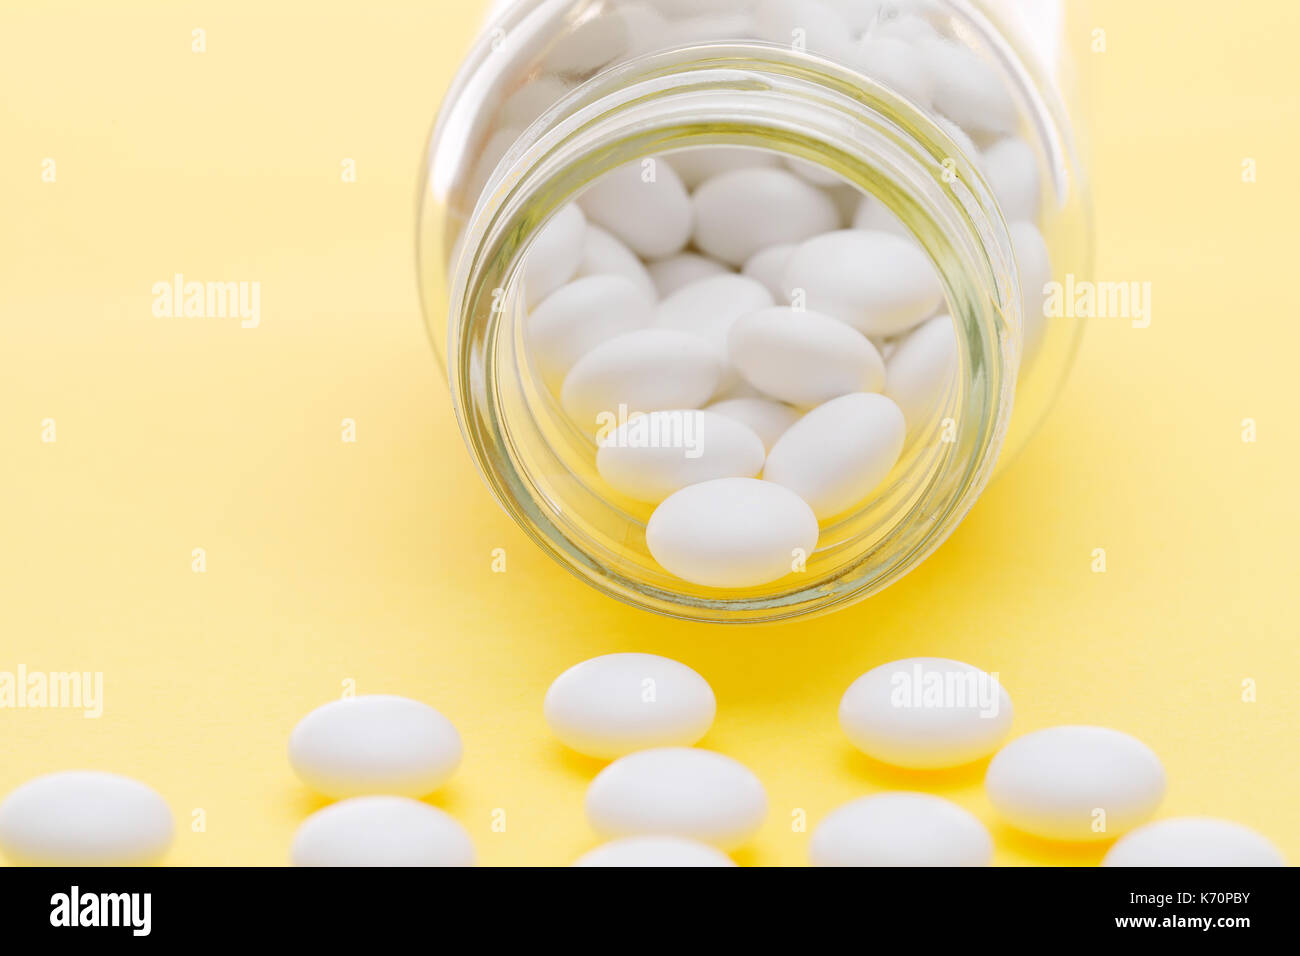 Glass Bottle And Pills On Light Yellow Background Stock Photo Alamy